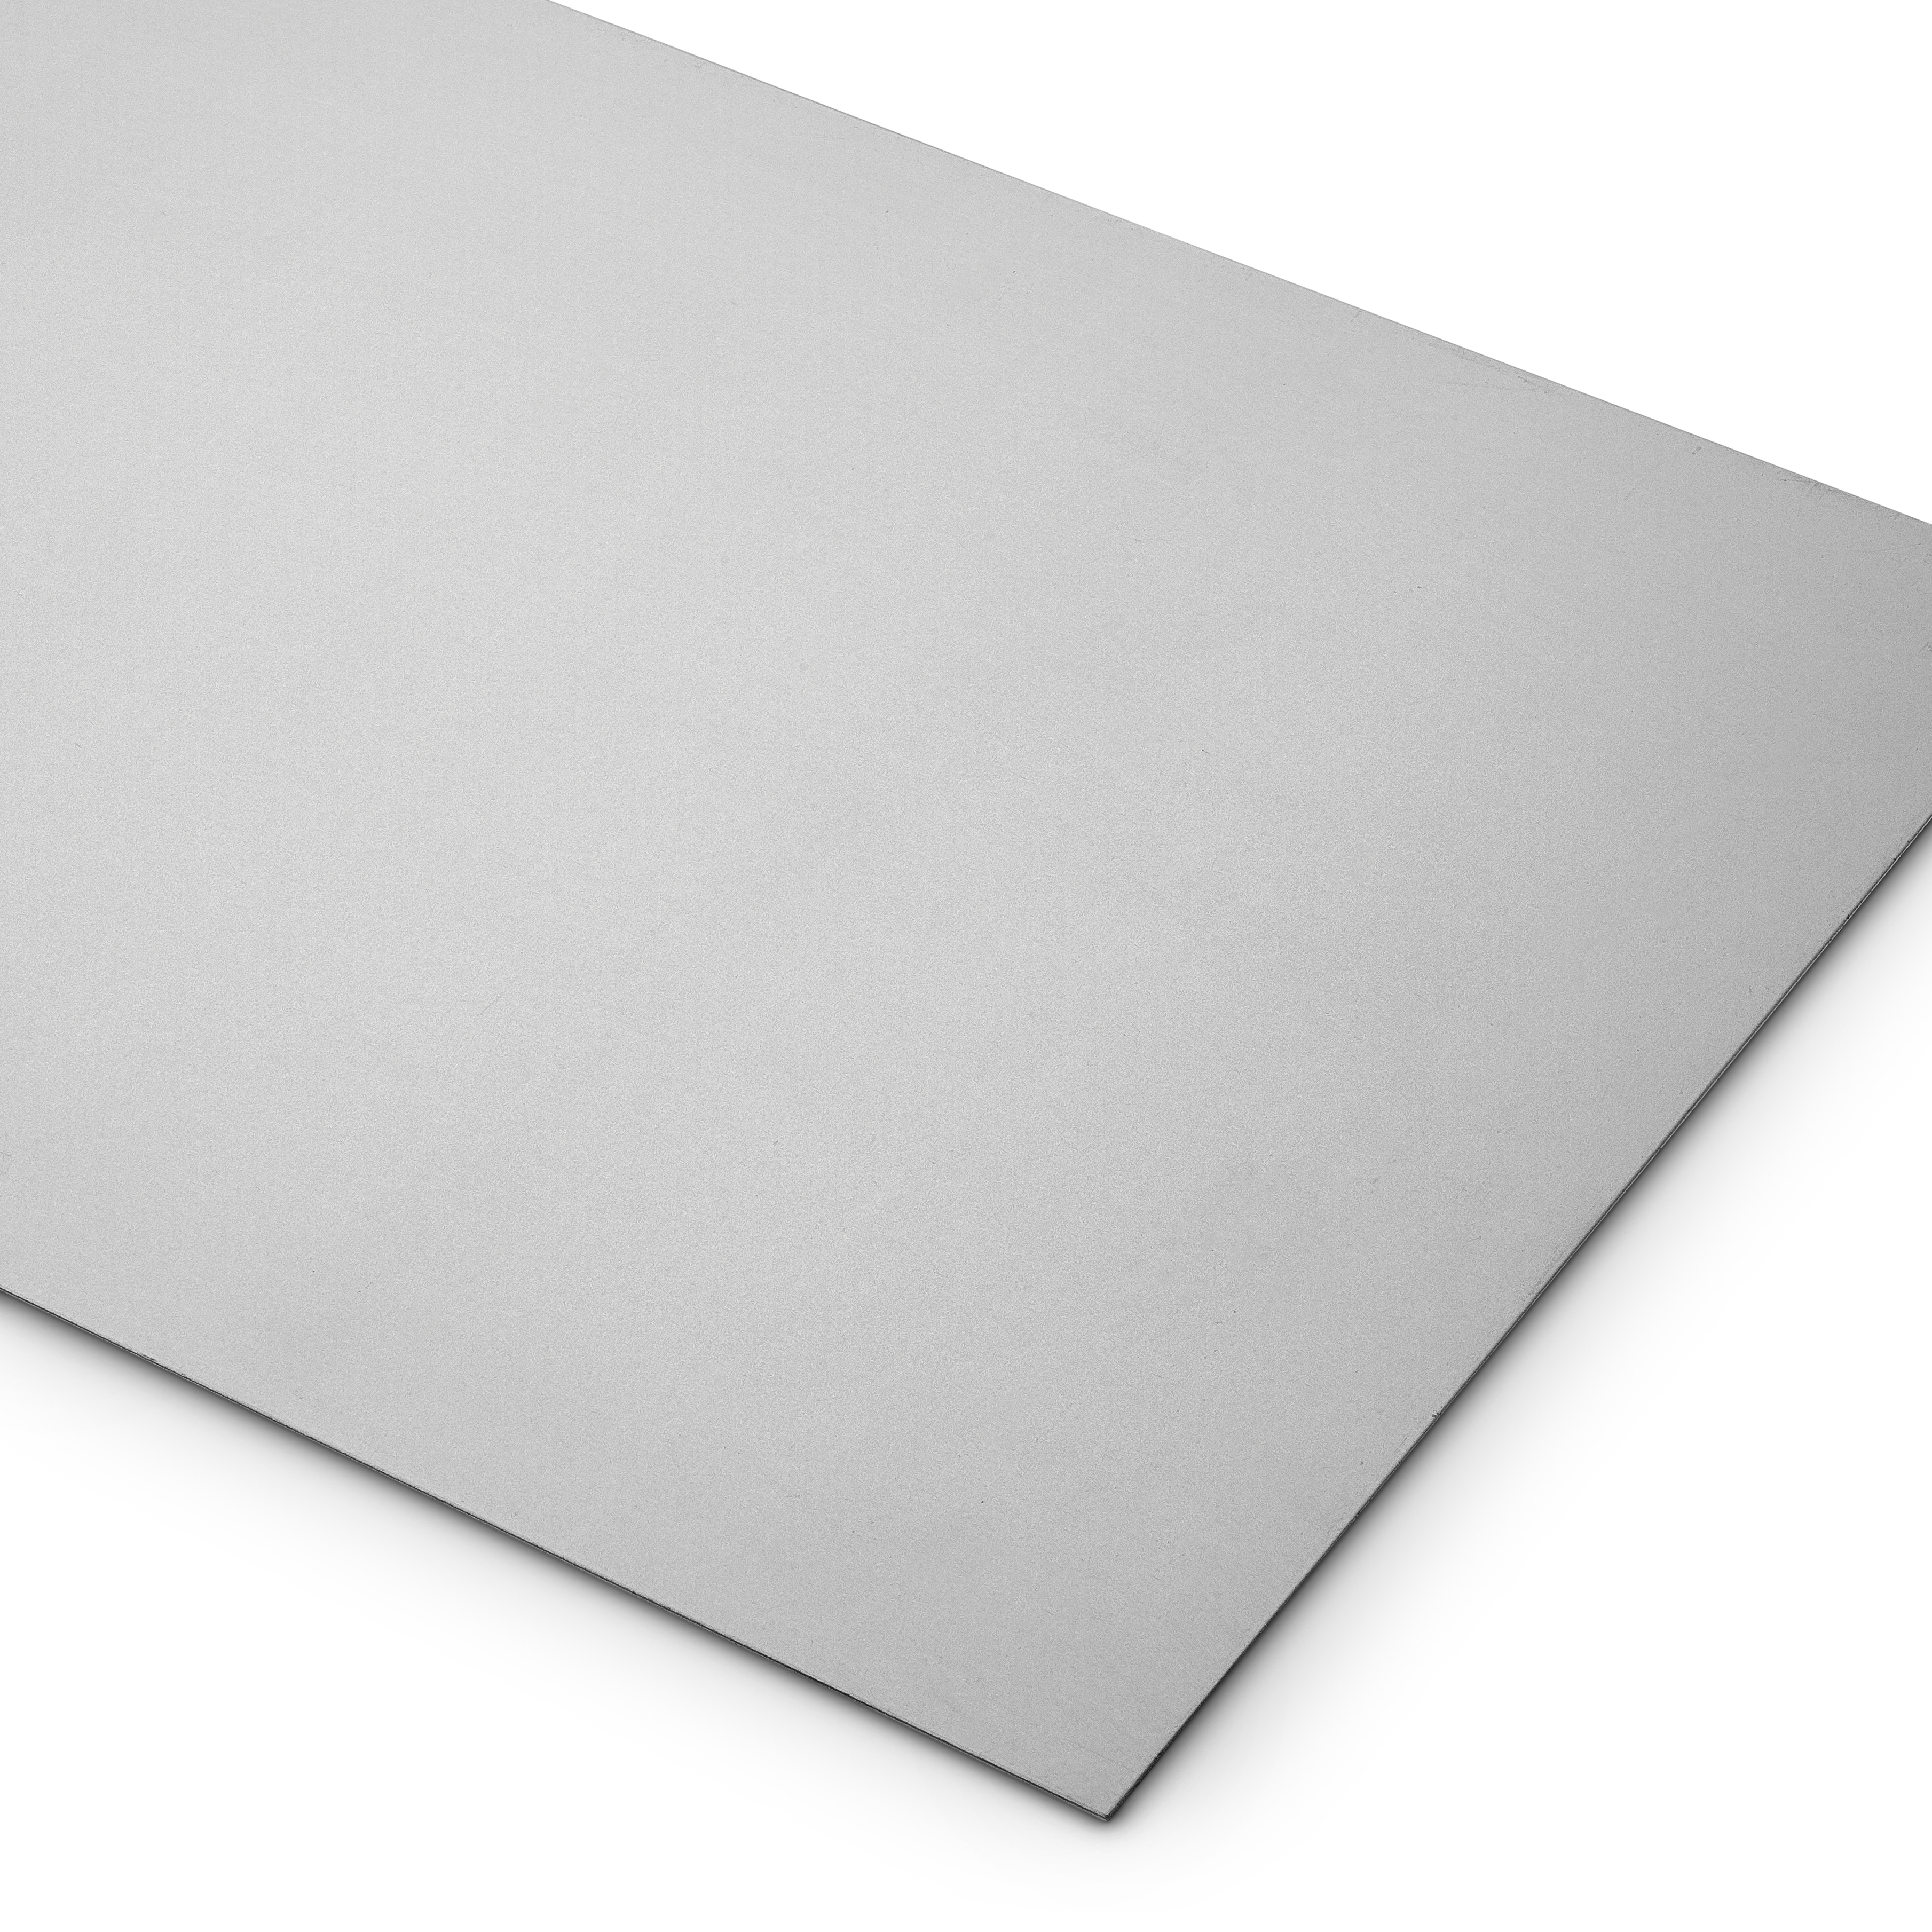 1.0mm cold rolled cr4 steel sheet plate various sizes thin metal 